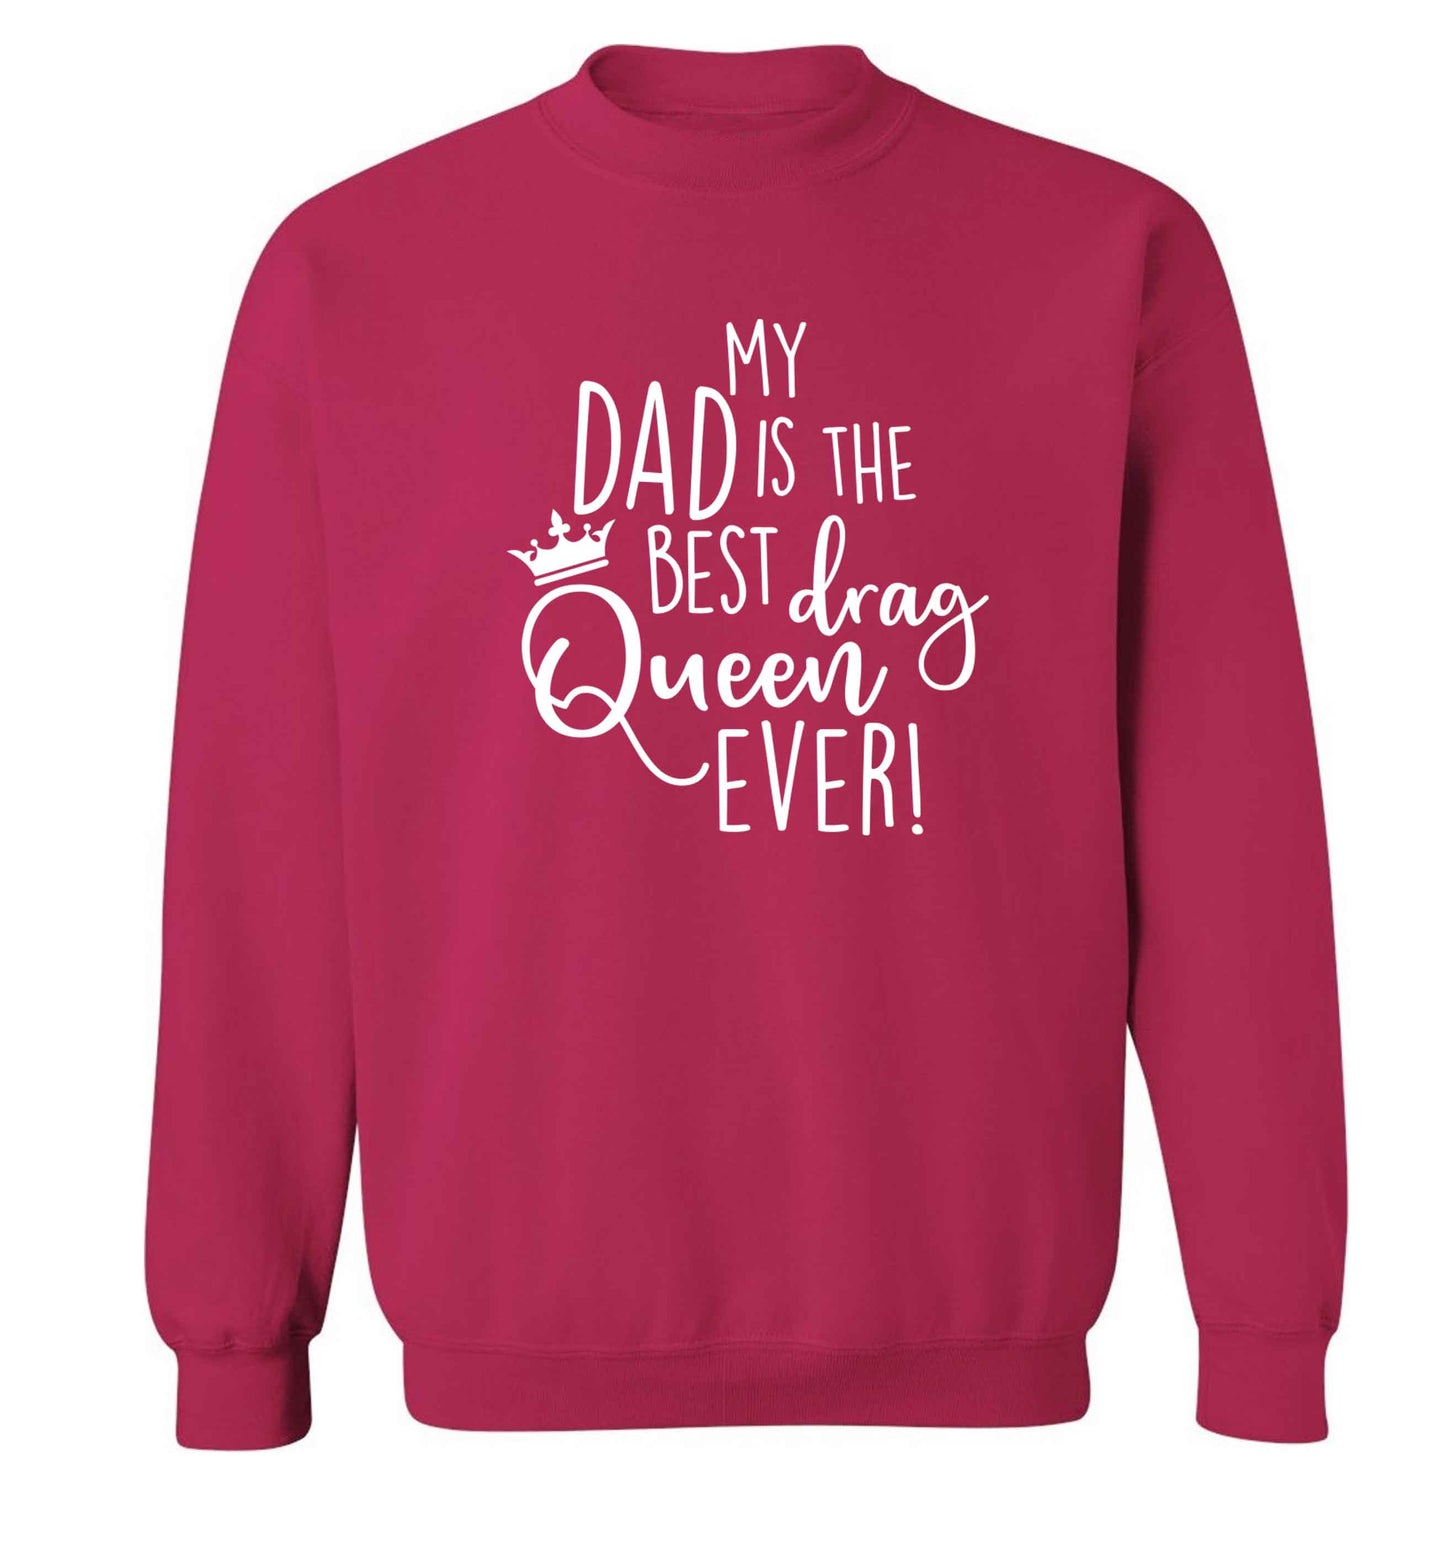 My dad is the best drag Queen ever Adult's unisex pink Sweater 2XL